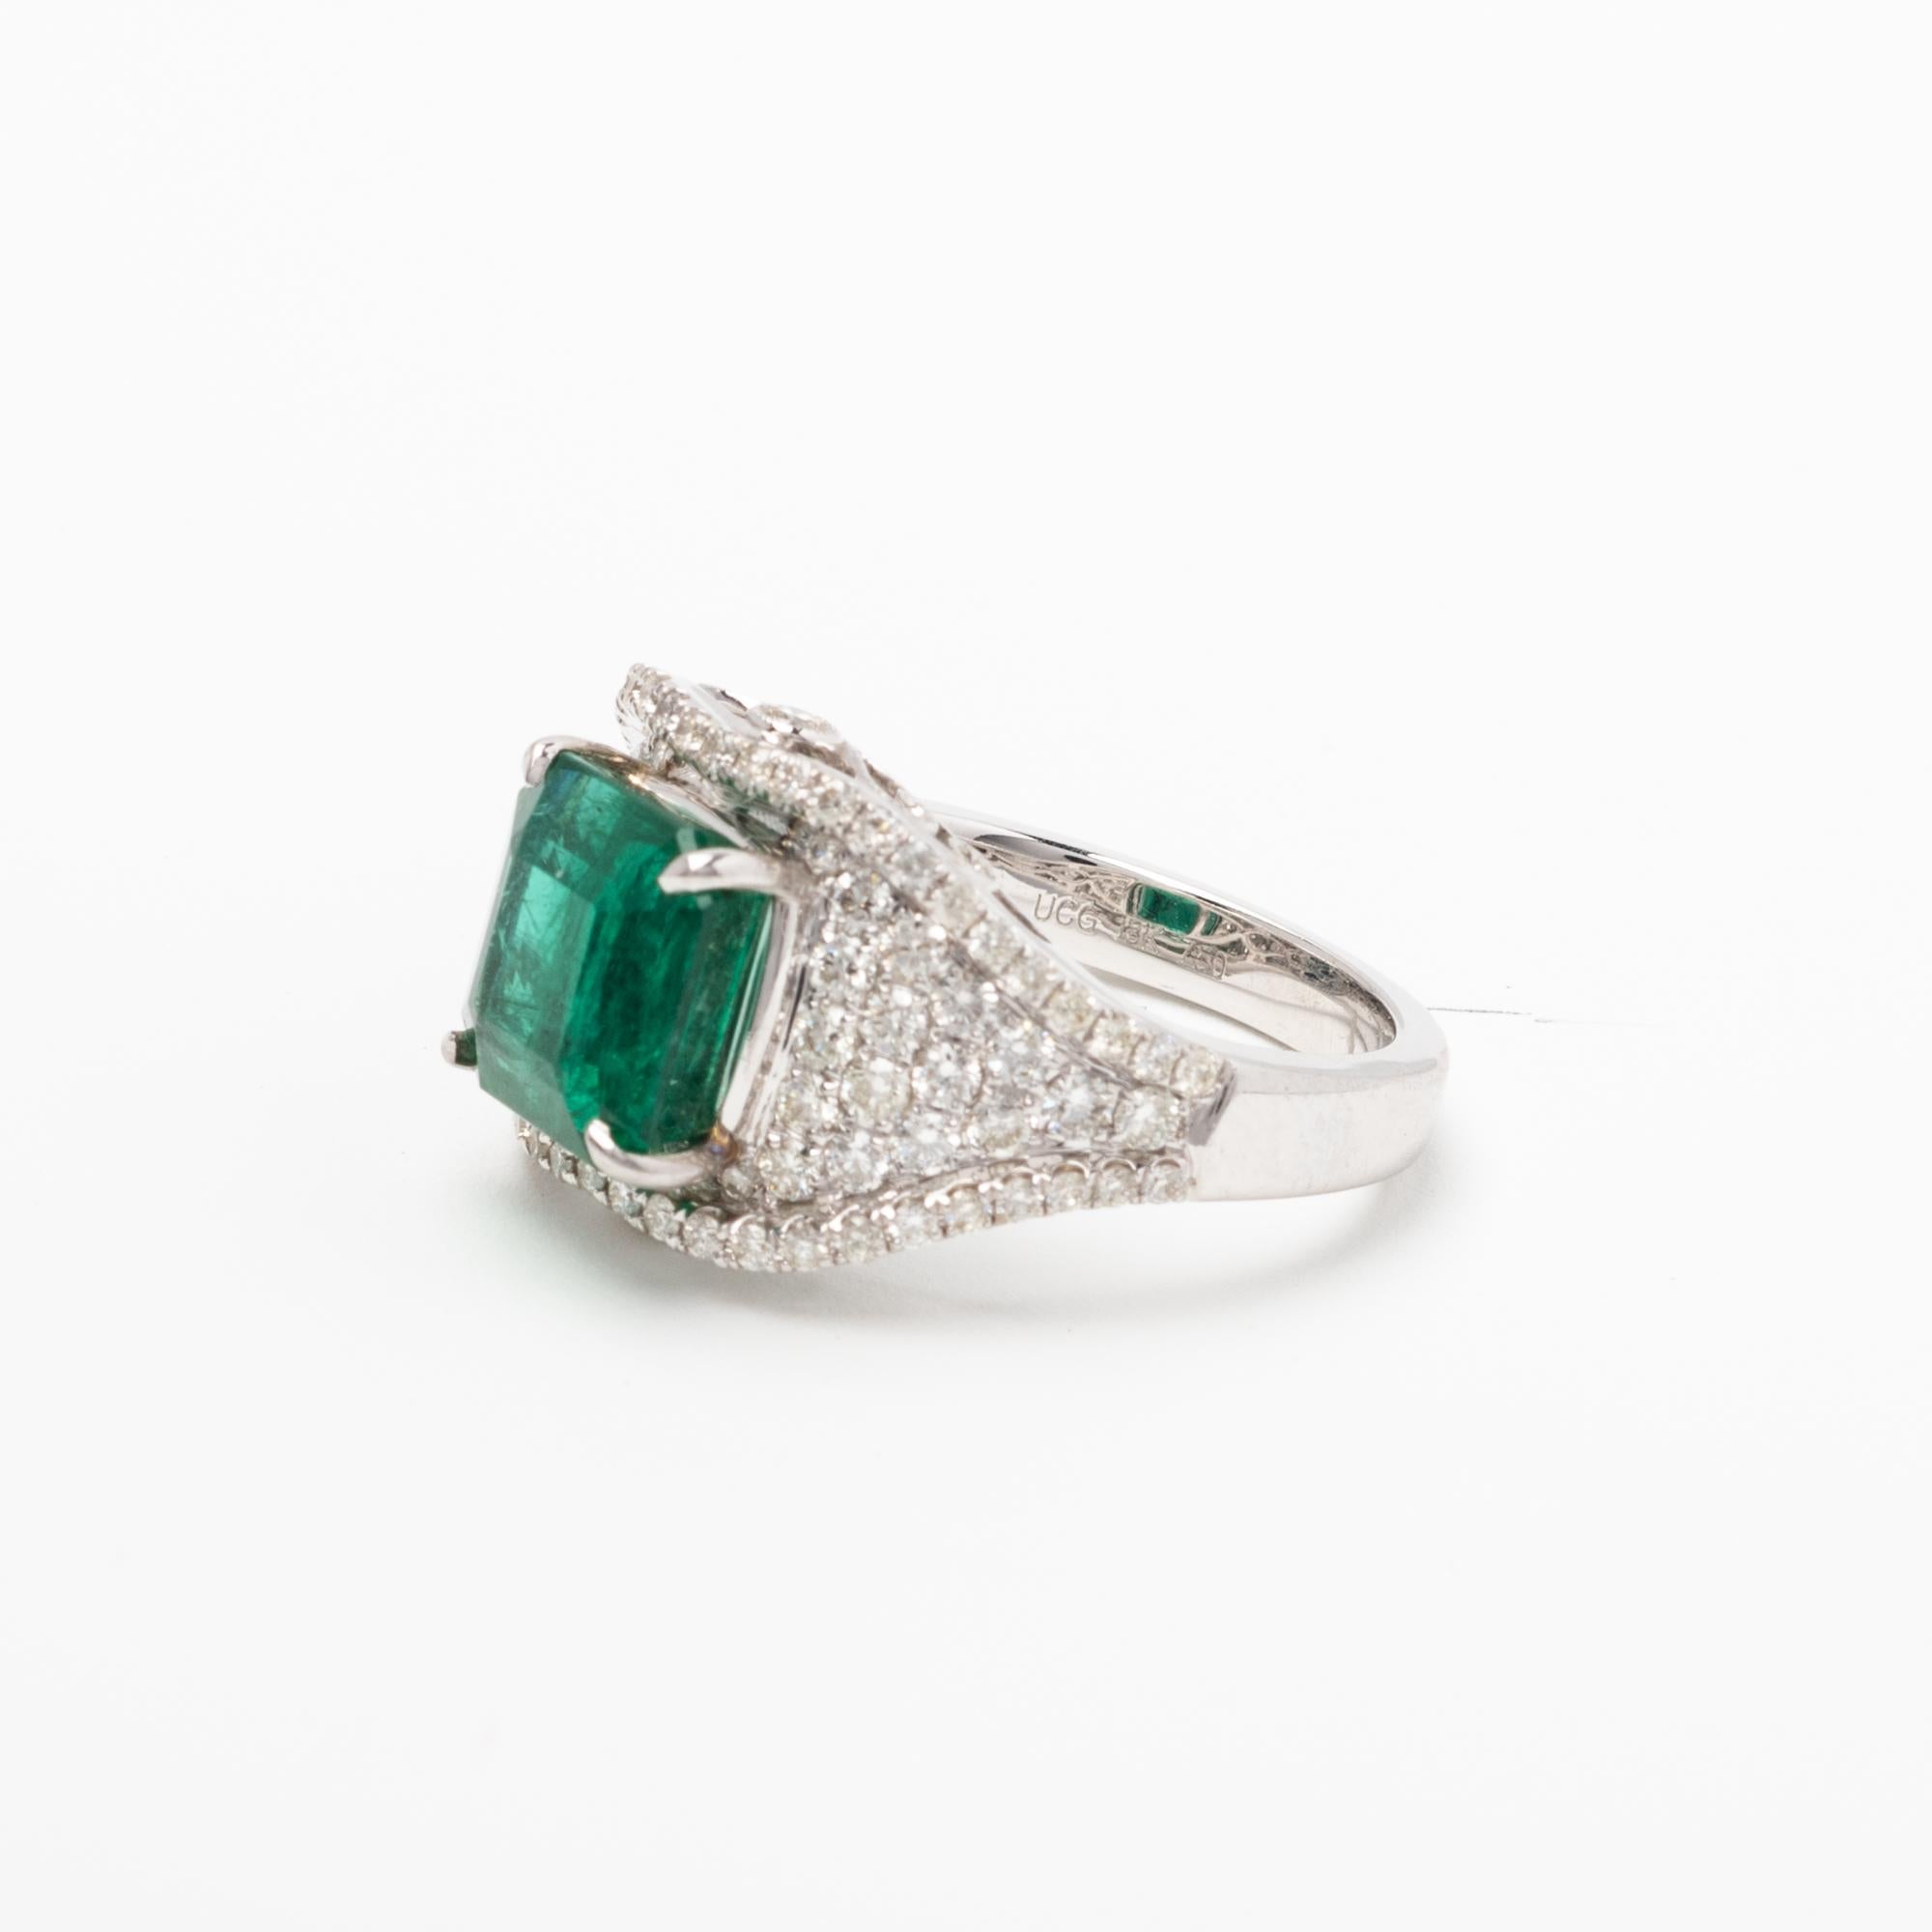 
Emerald and Diamond Ring 
centered by an emerald cut emerald weighing approximately 3.78 cts, 
set with diamonds weighing approximately 1.08 cts 
mounted in 18kt white gold 
7.70 grams (gross) , size 6 1/2 

accompanied with AIG paperwork